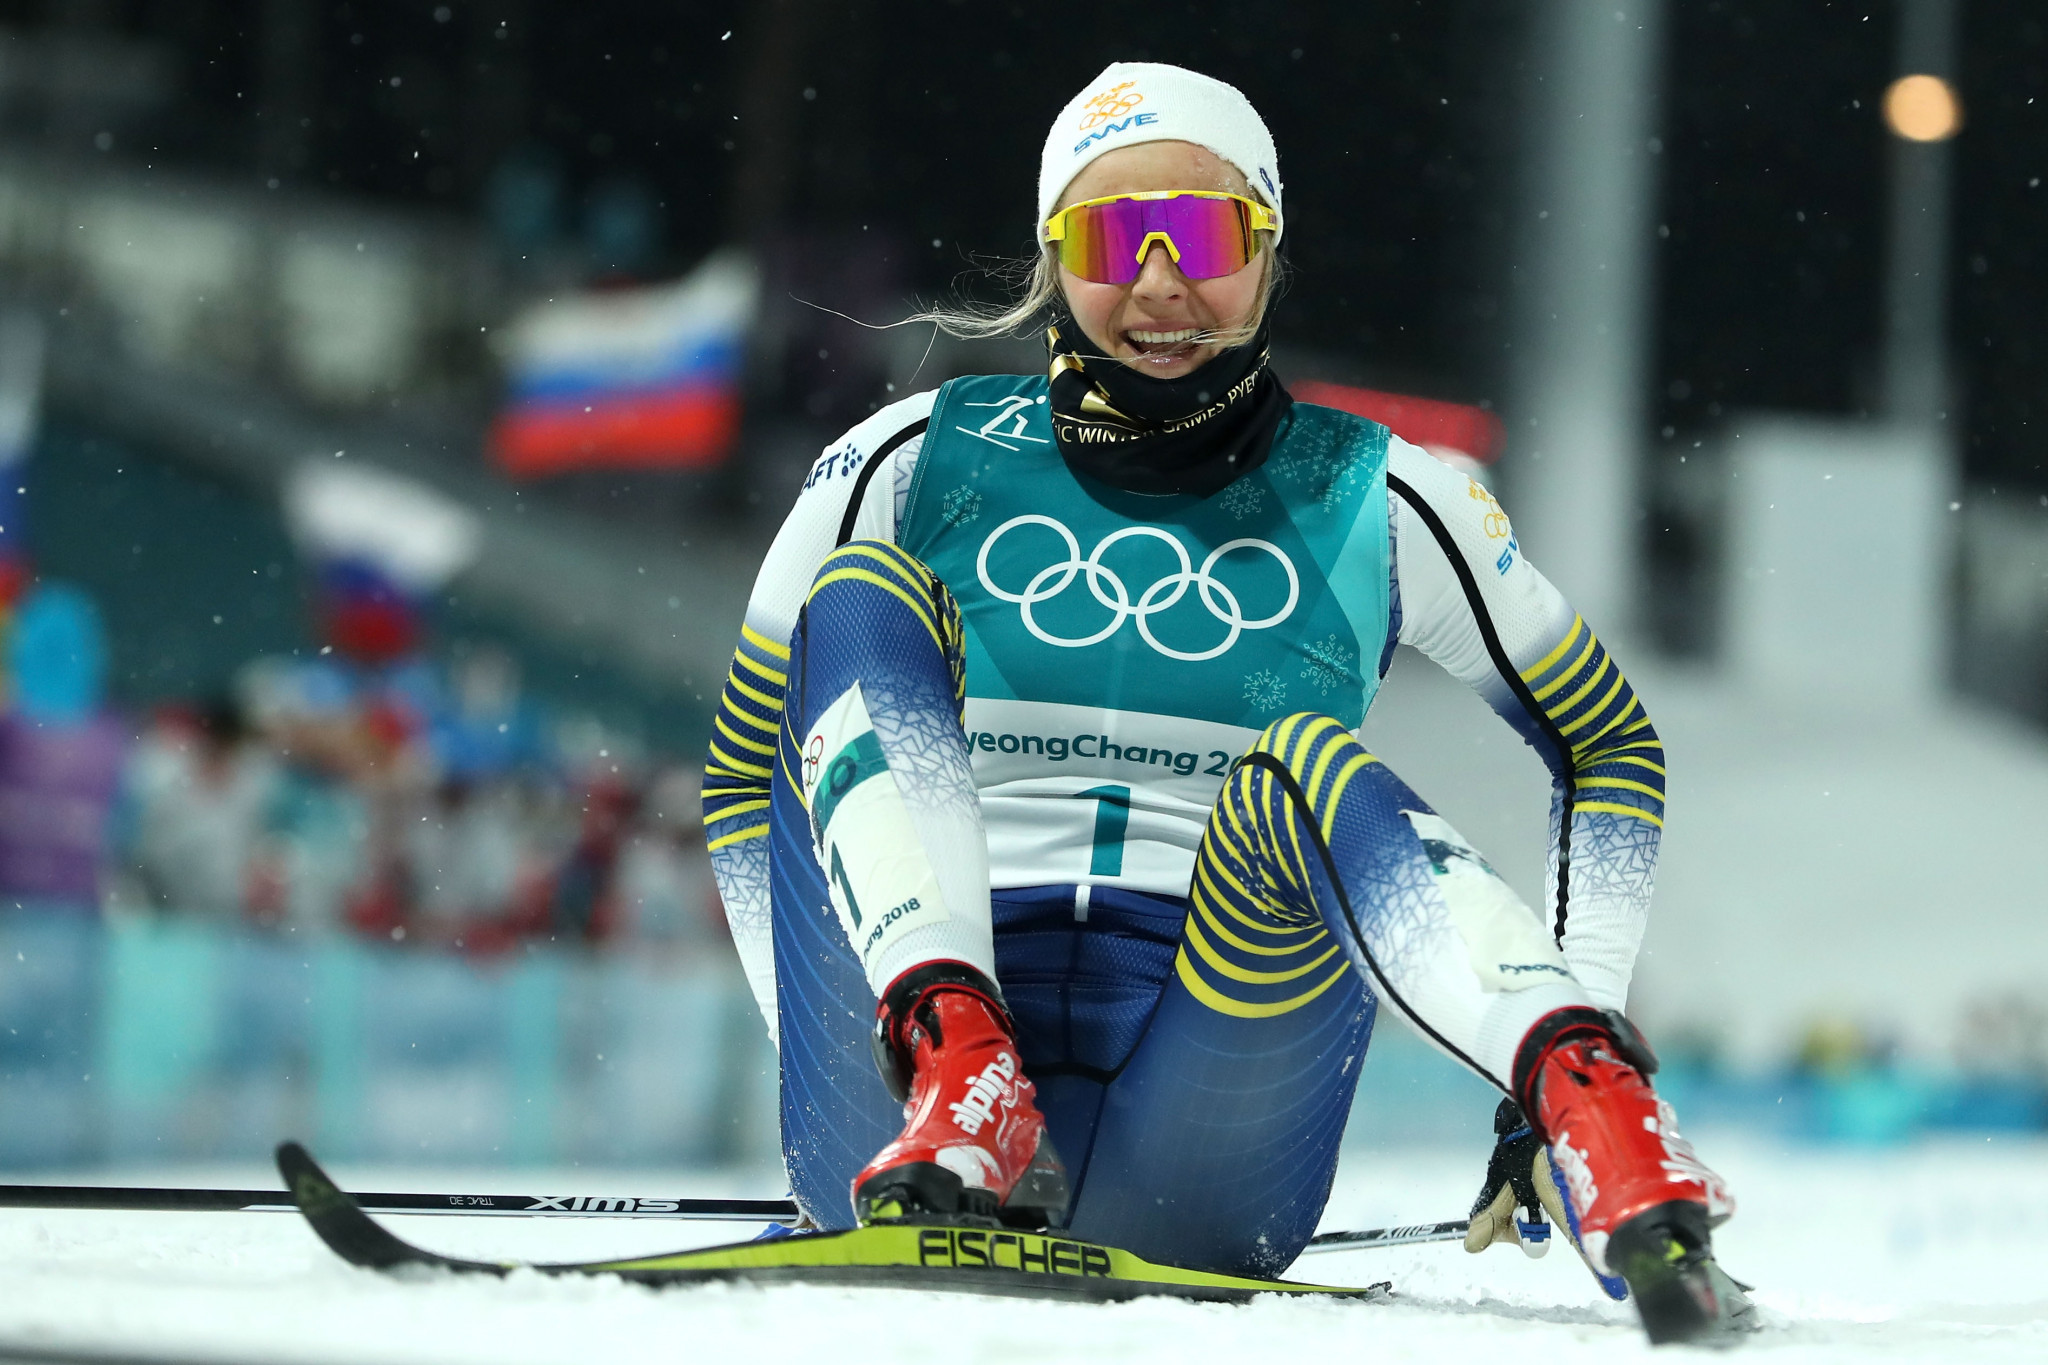 Stina Nilsson led from start to finish in the women's competition ©Getty Images